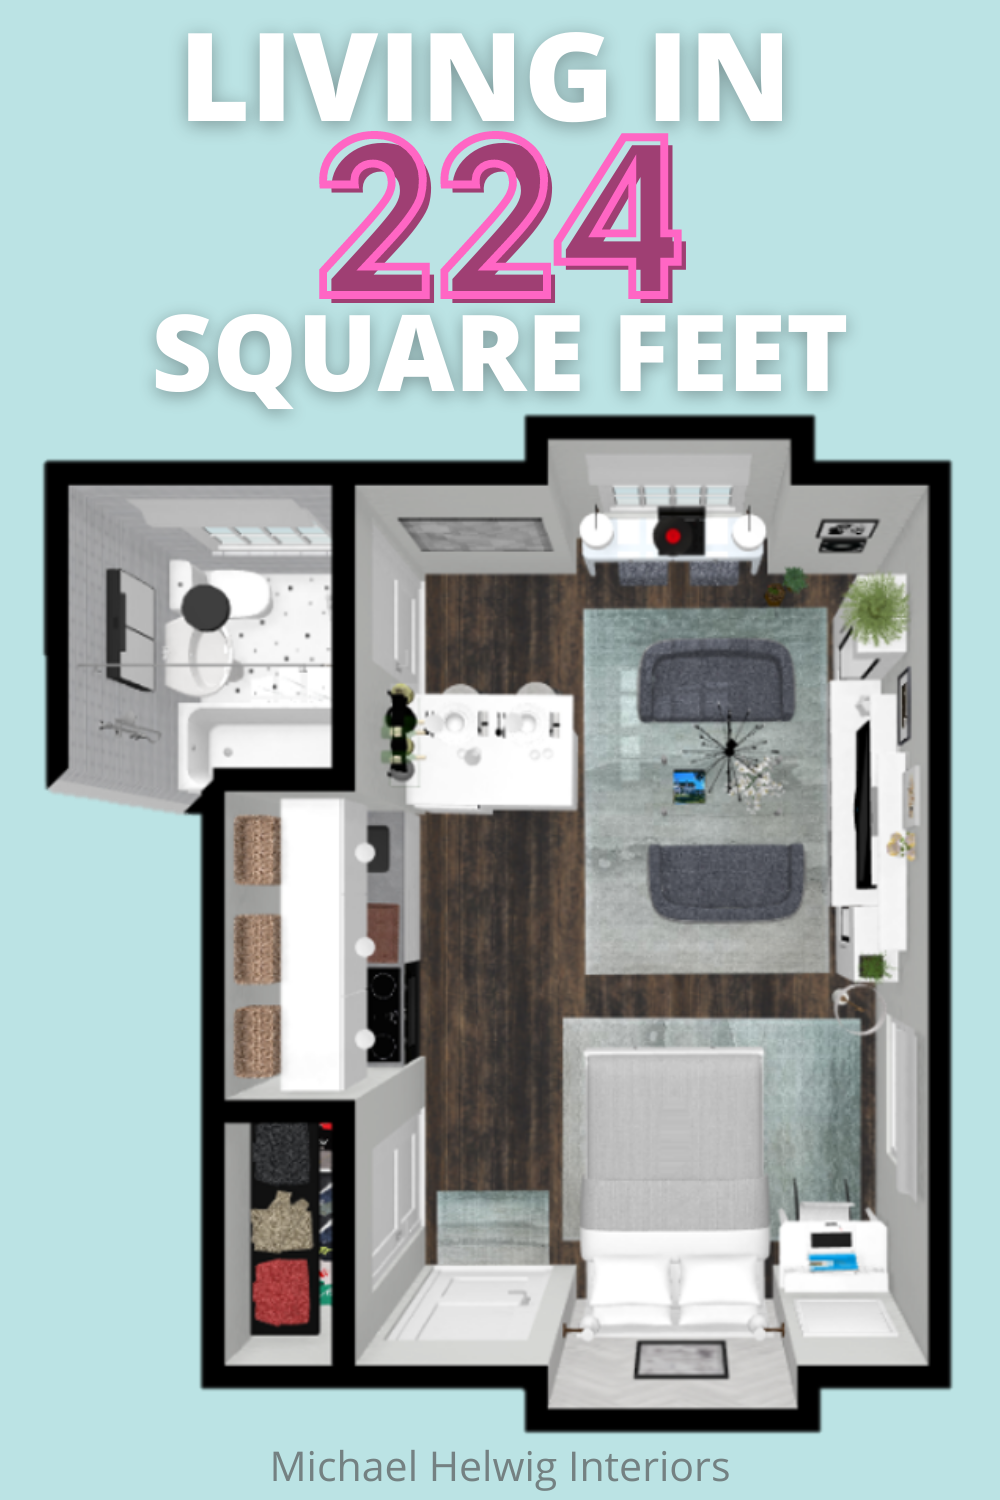 Plunderen exotisch banaan What's it Like to Live in just over 200 square feet? How to layout a 12' x  19' New York City Studio Apartment. — Michael Helwig Interiors